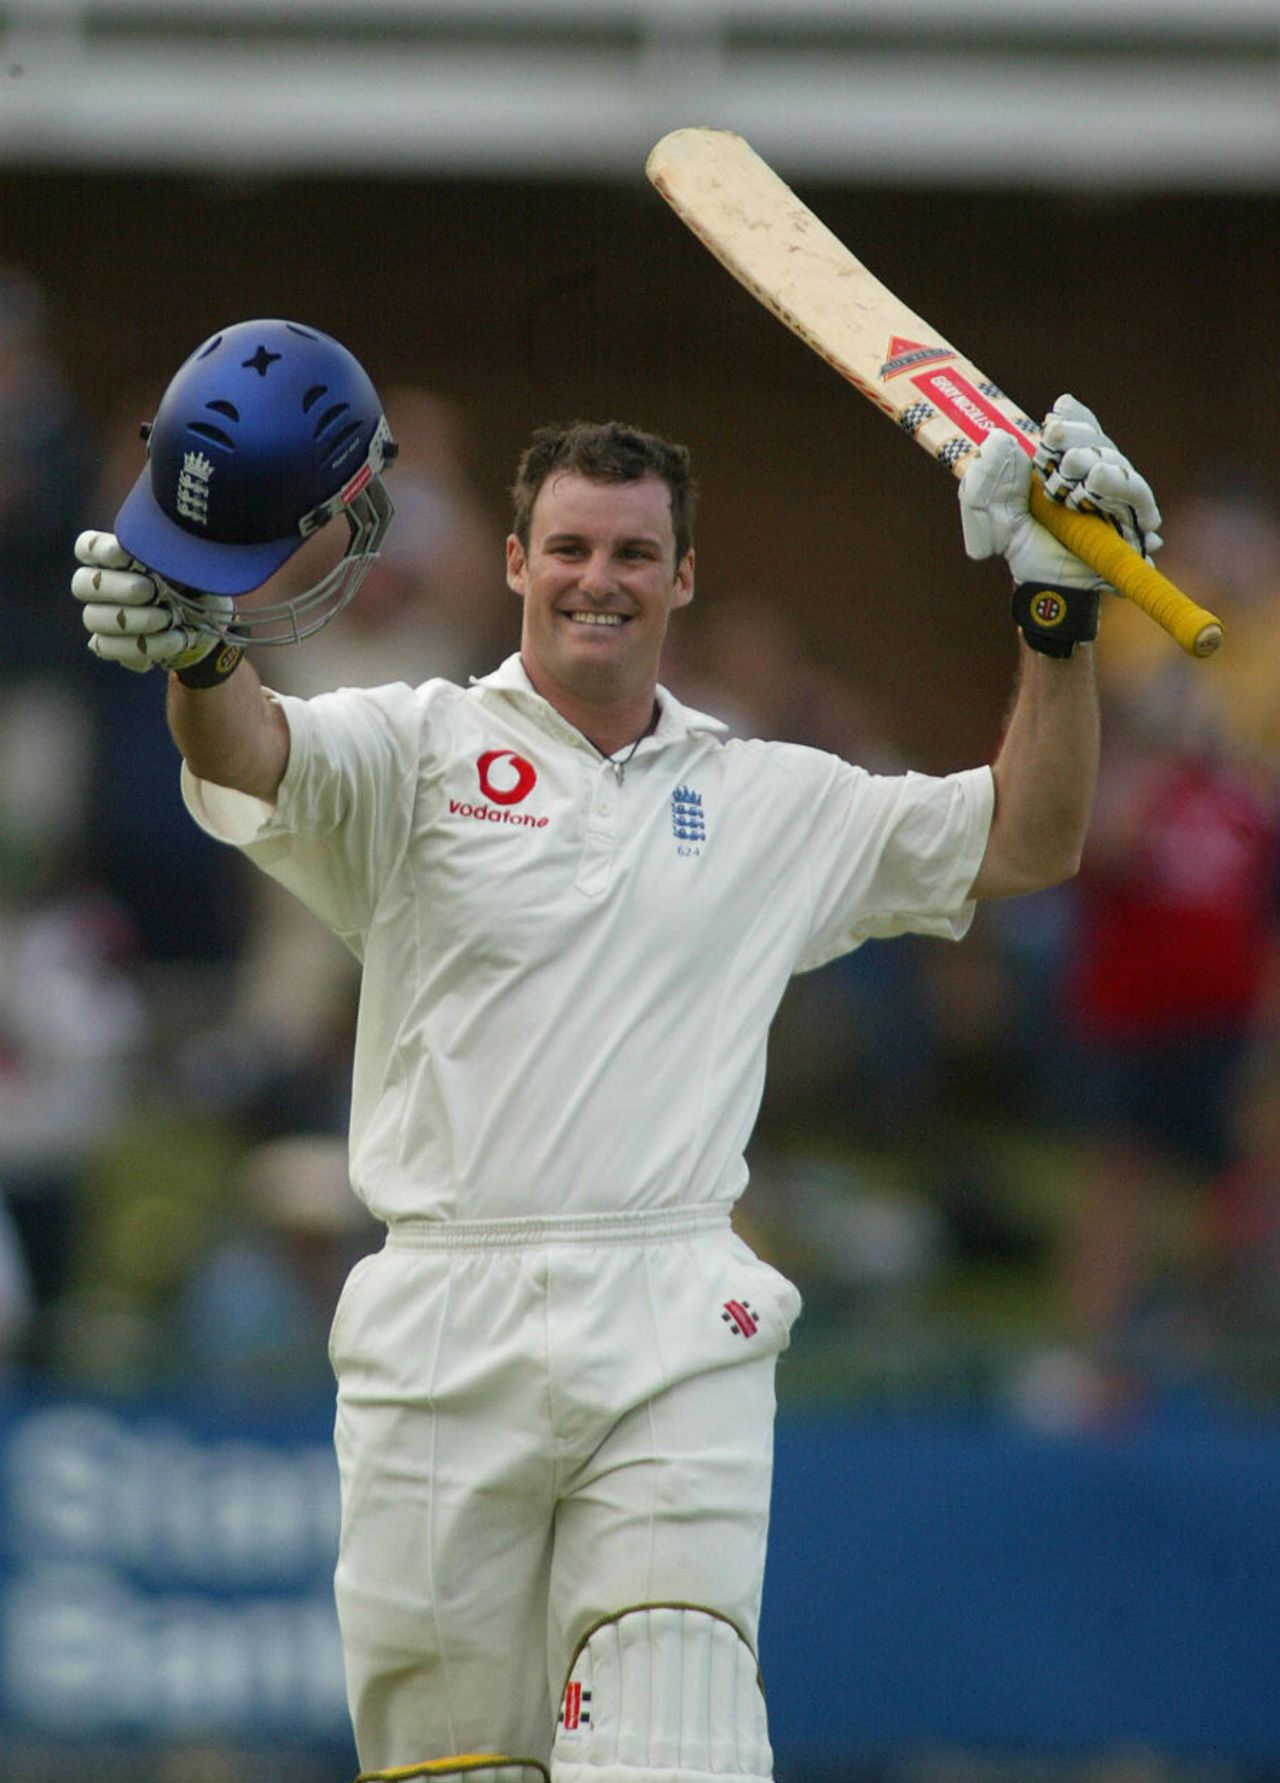 Andrew Strass celebrates his hundred in the first Test at Port Elizabeth, December 2004